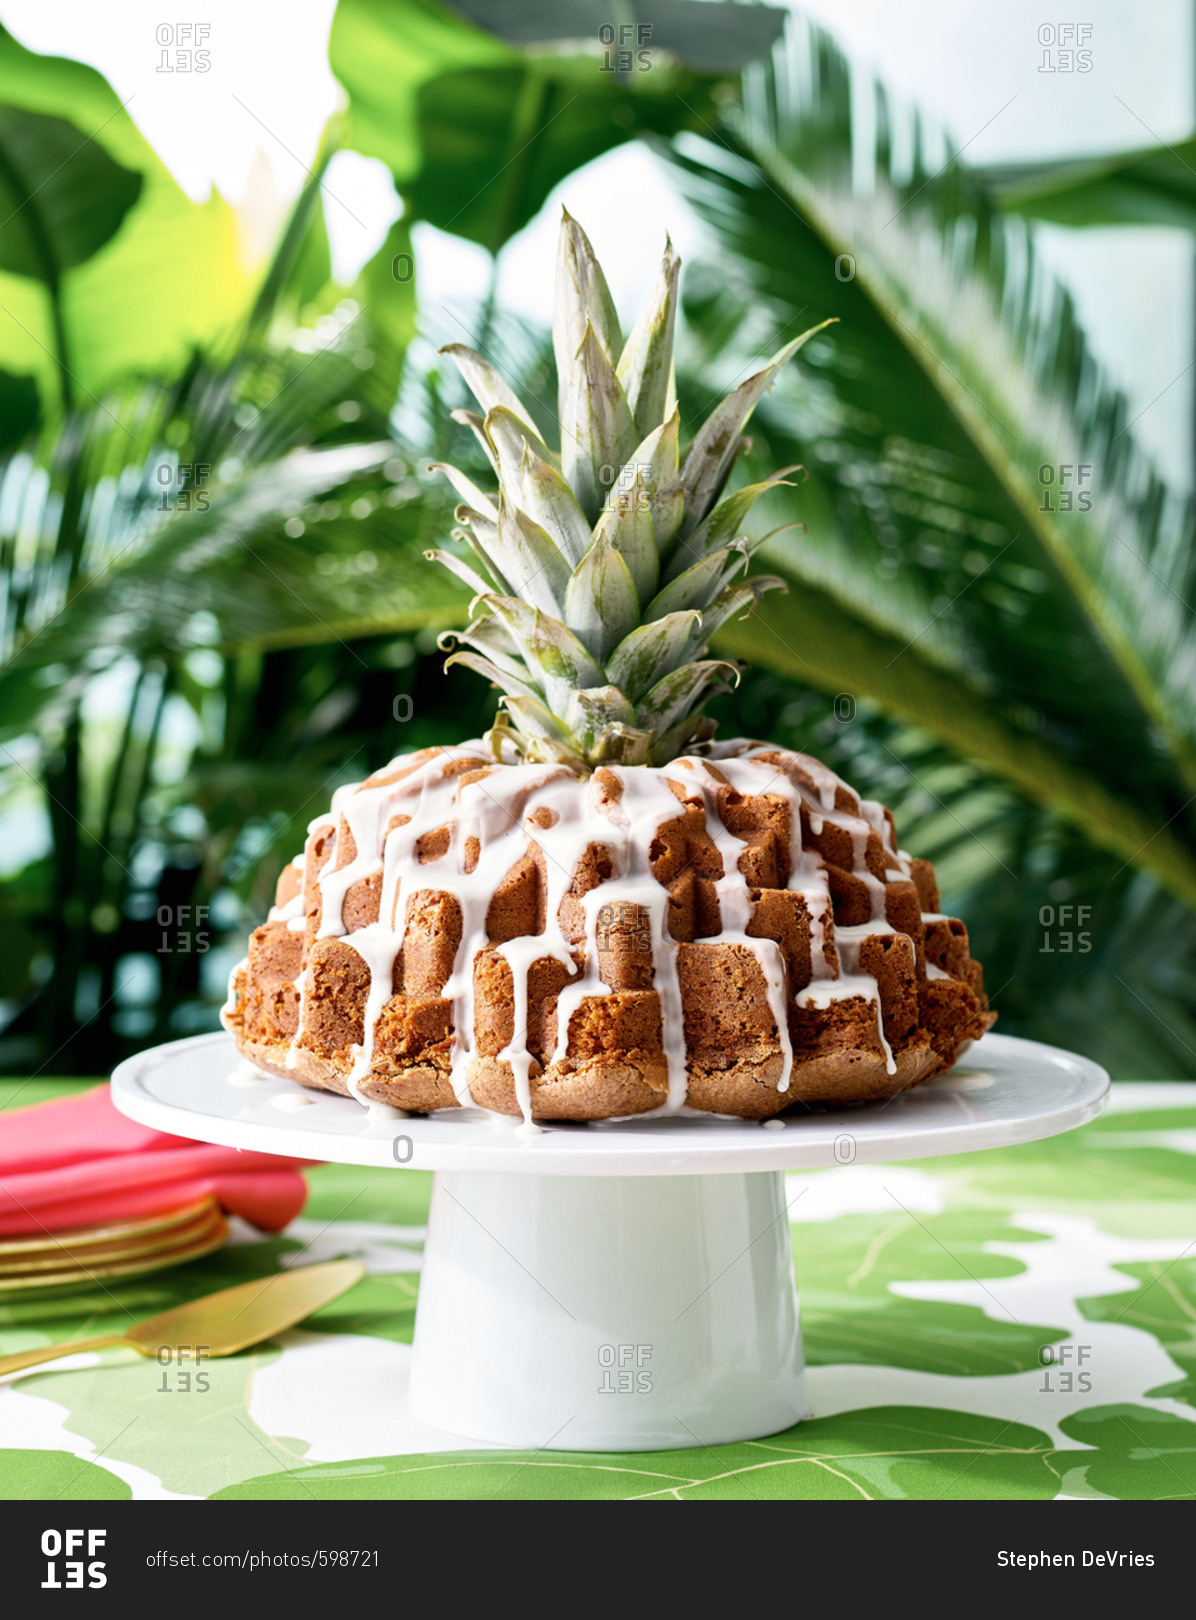 Tropical cake with pineapple top in center